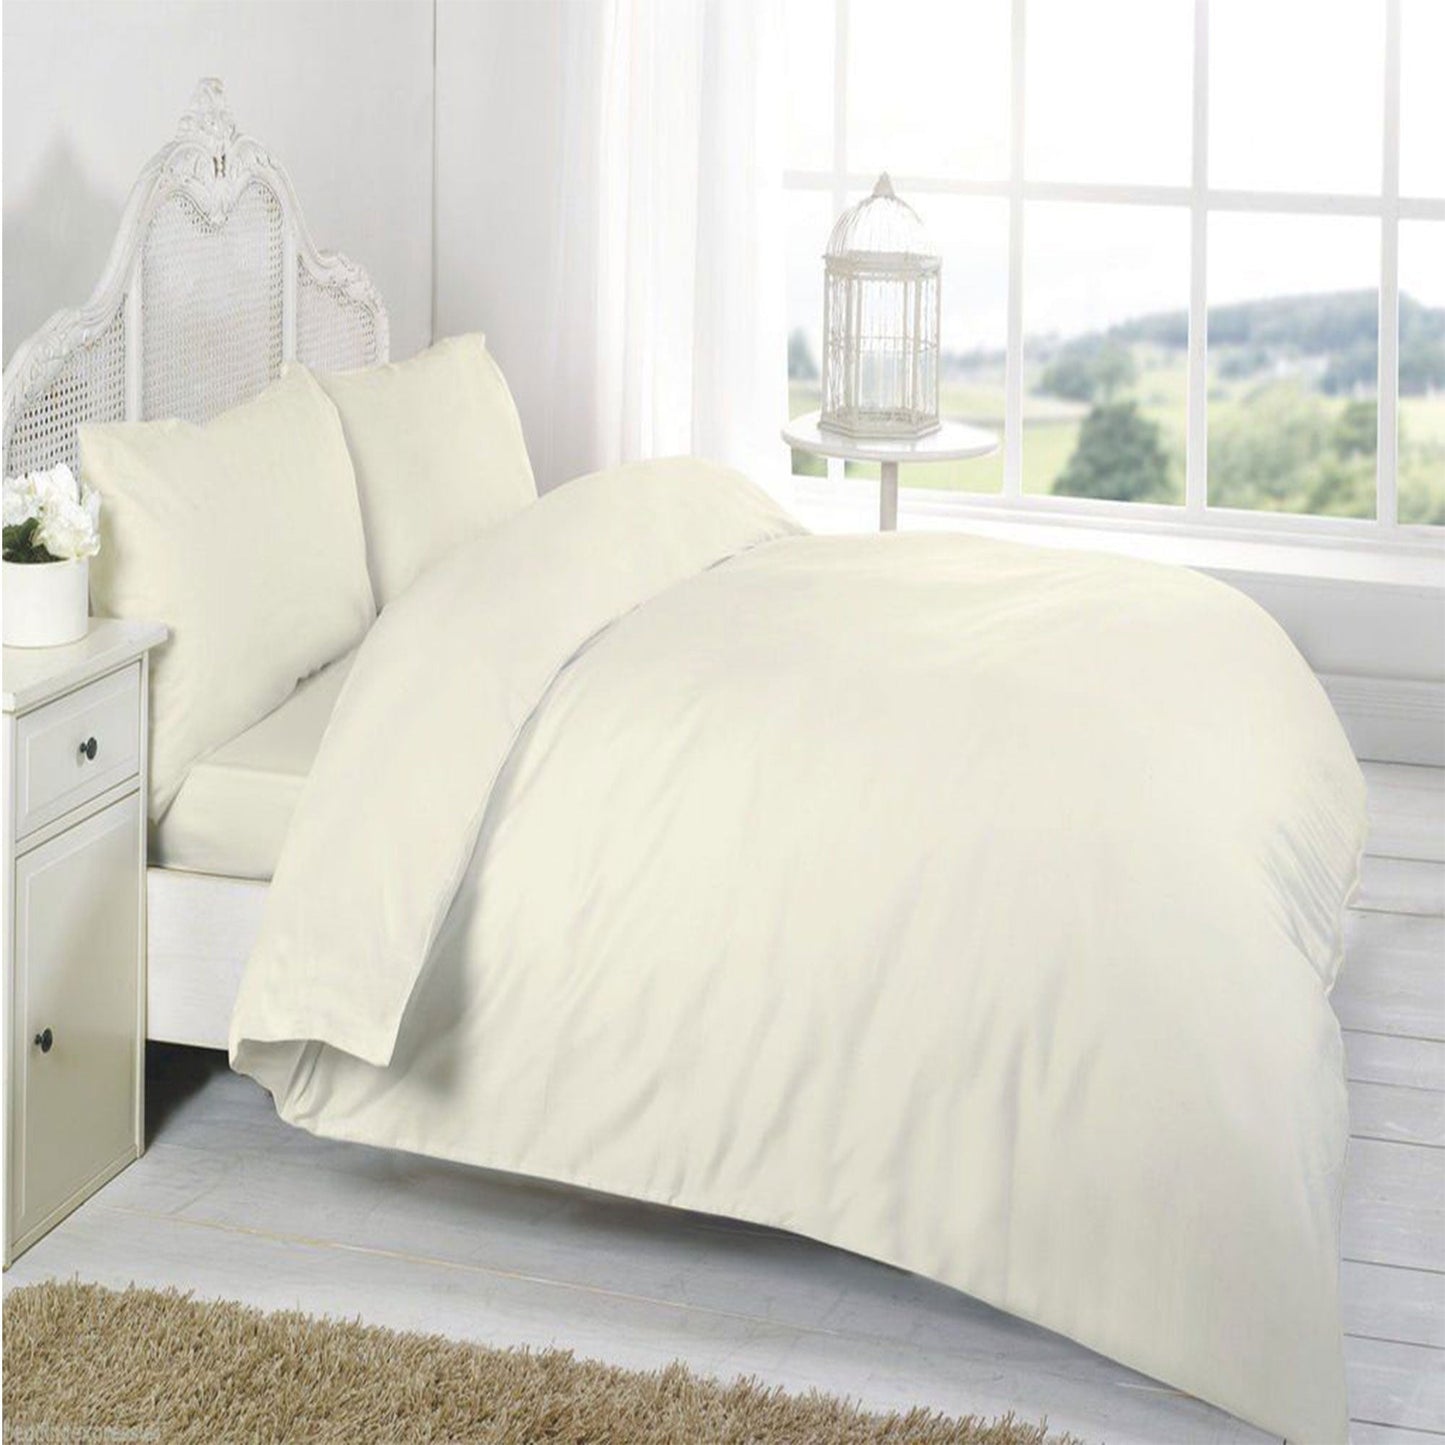 Egyptian Cotton T200 Duvet Cover Set In Several Sizes & Color, Pillow Cases Sold Separately - TheComfortshop.co.ukDuvet Covers0721718961536thecomfortshopTheComfortshop.co.ukCream T200 Duvet SingleCreamSingleEgyptian Cotton T200 Duvet Cover Set In Several Sizes & Color, Pillow Cases Sold Separately - TheComfortshop.co.uk